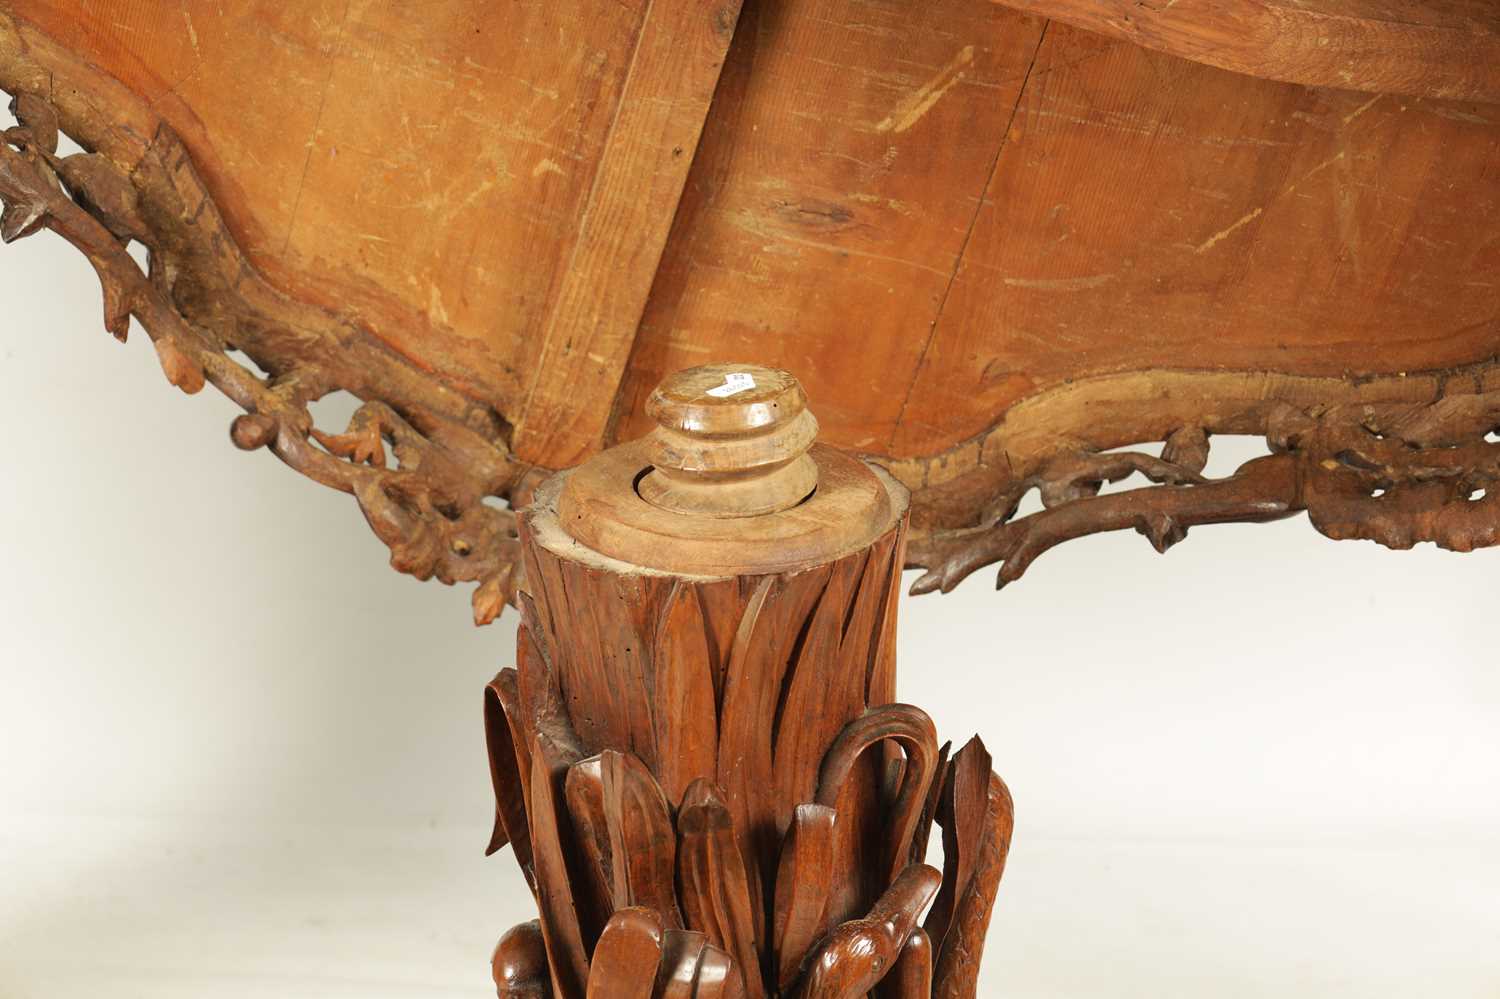 A FINE EARLY 19TH CENTURY CONTINENTAL FIGURED WALNUT CARVED CENTRE TABLE - Image 11 of 11